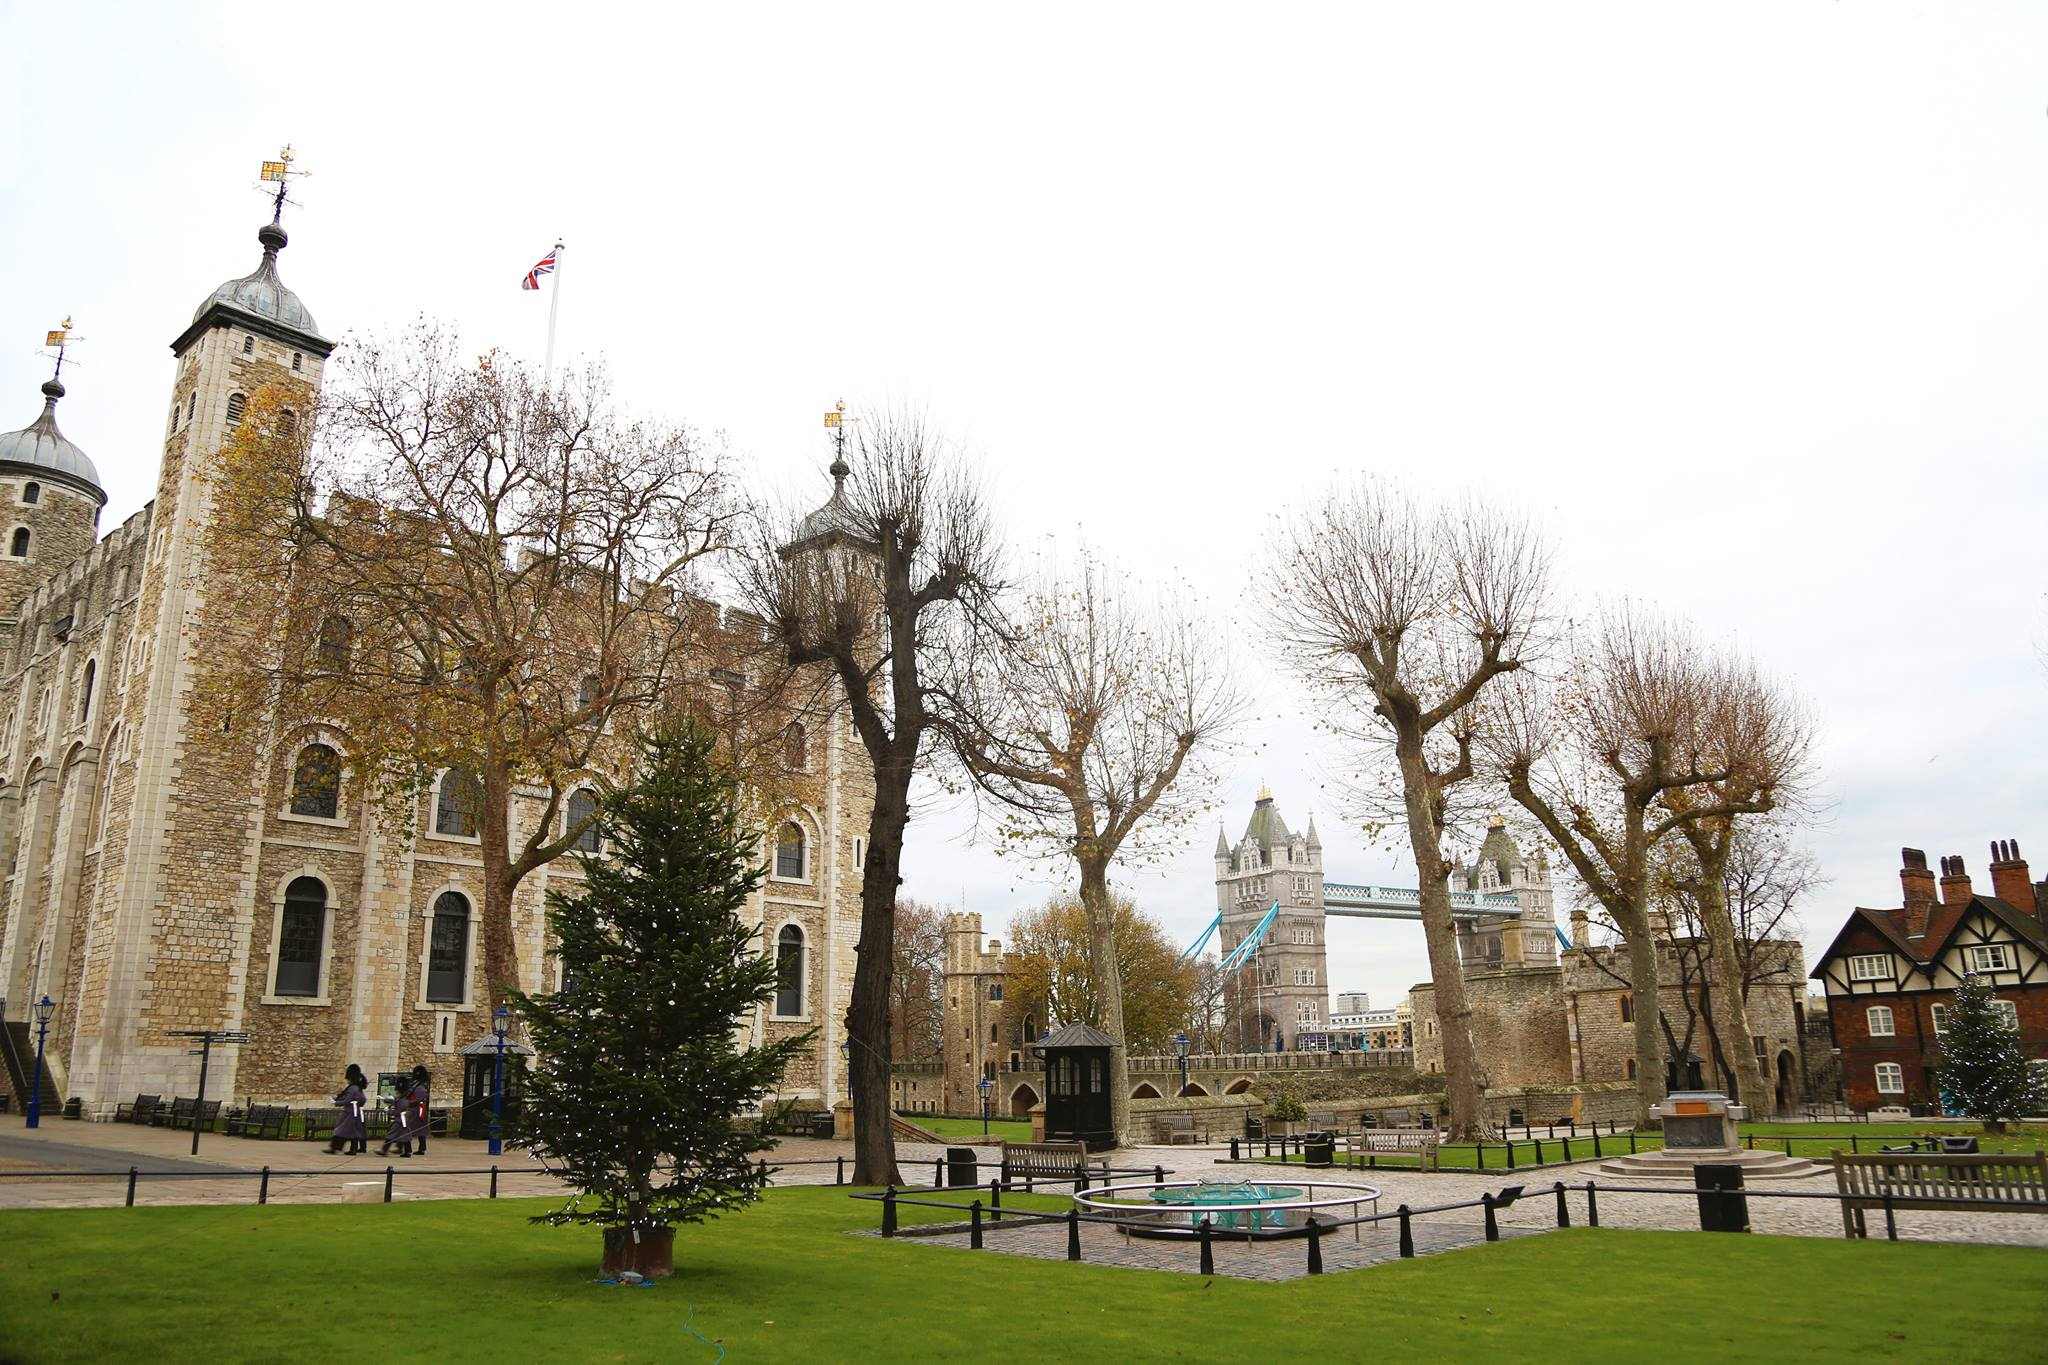 Get VIP access to the Tower of London before the crowds and check out all the city has to offer. Get Tower of London tour tickets.